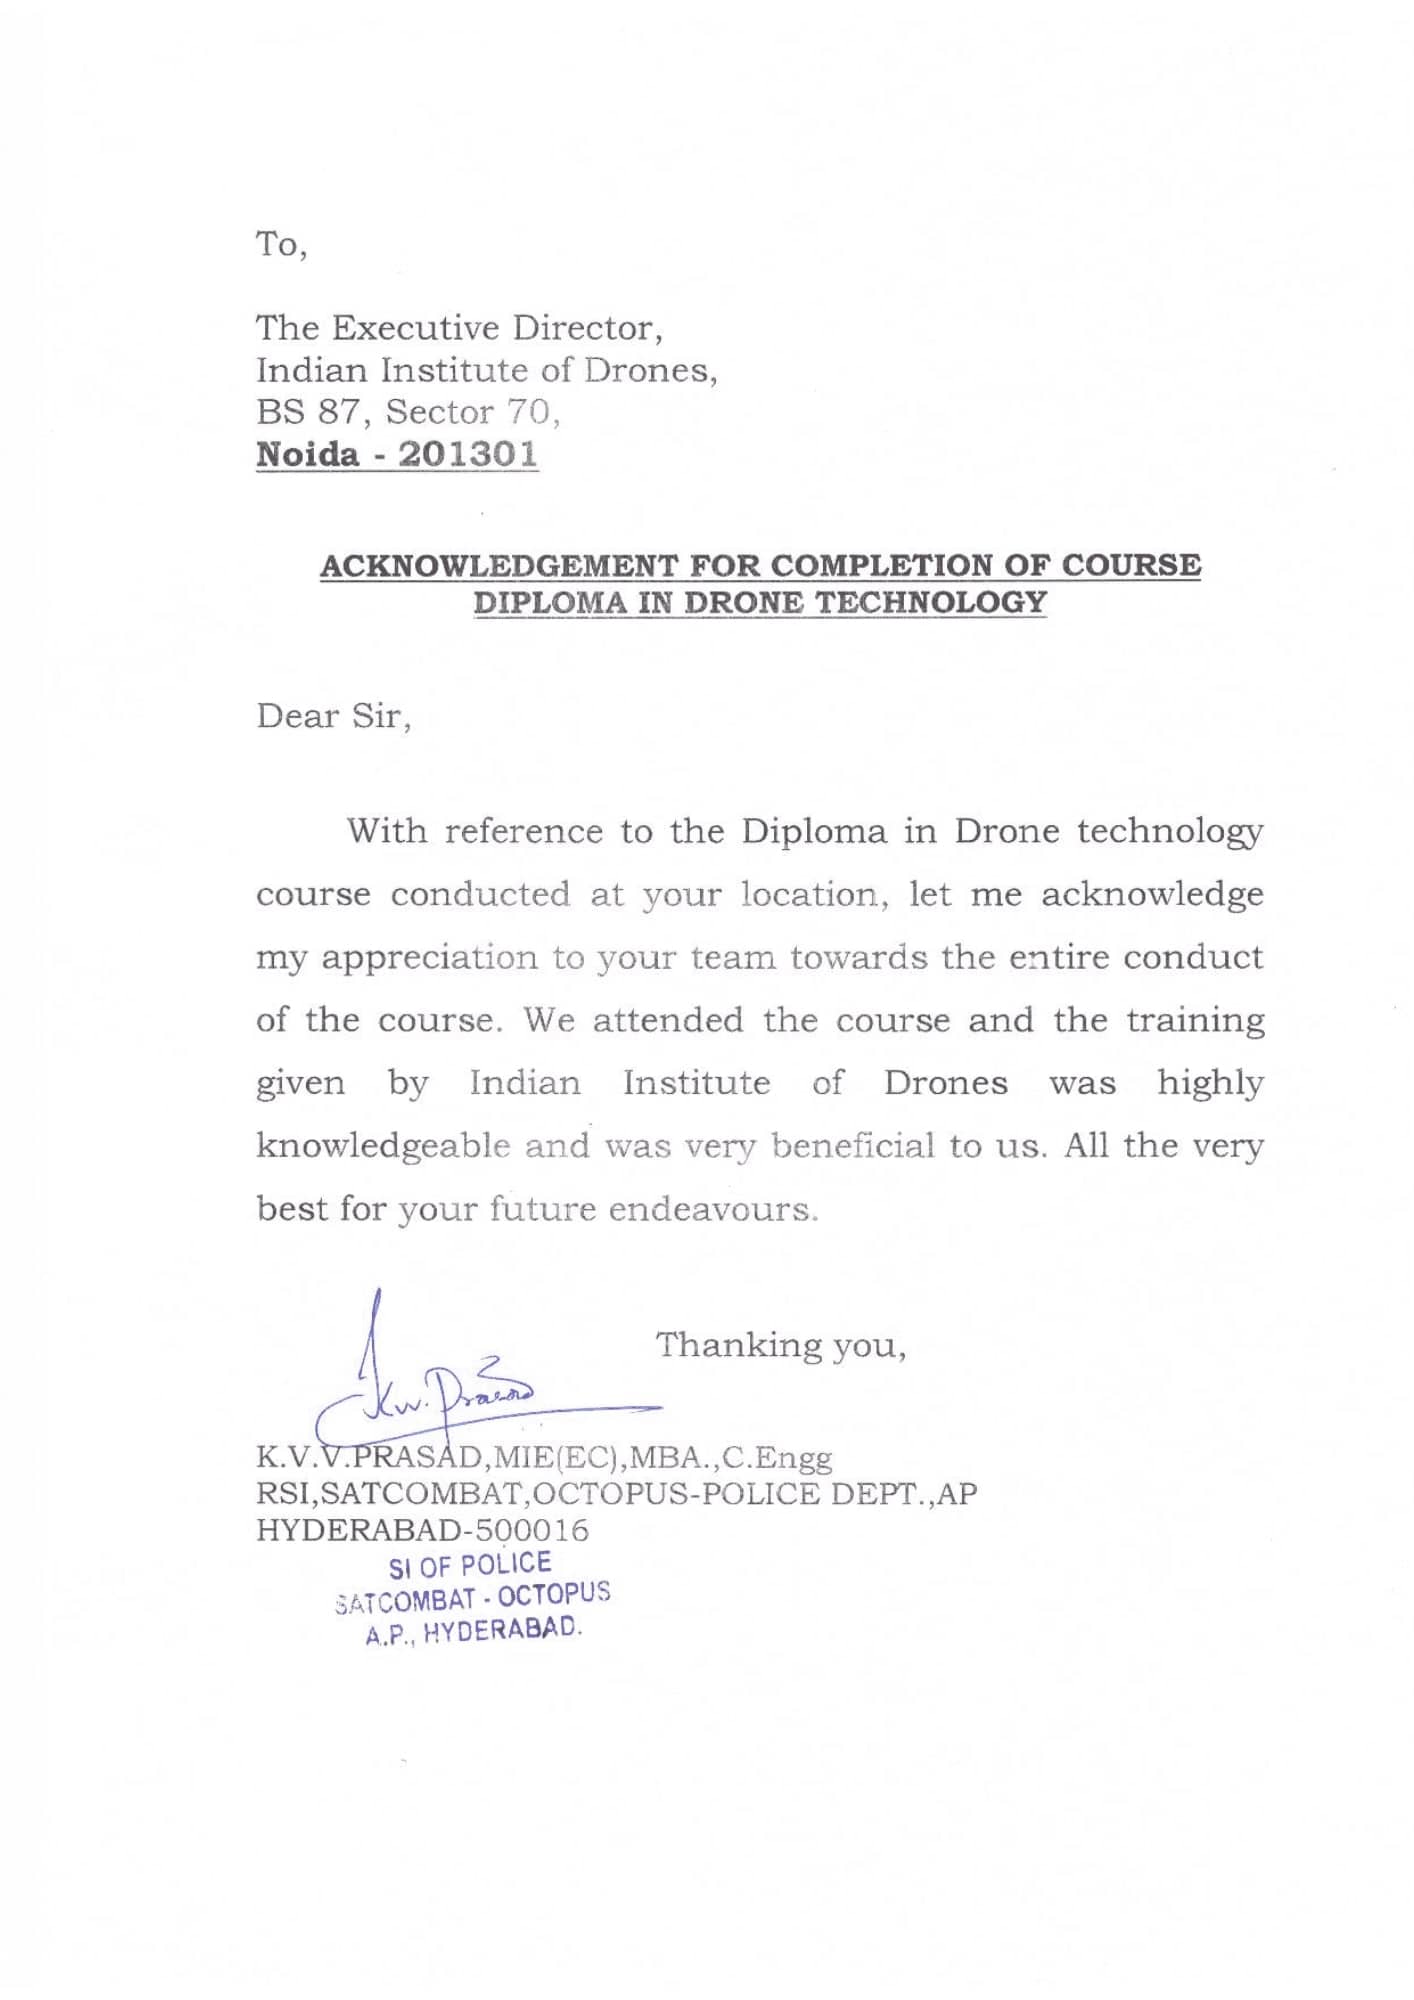 Satisfactory Letter for Drone Training Received from Octopus, Andhra Pradesh Police